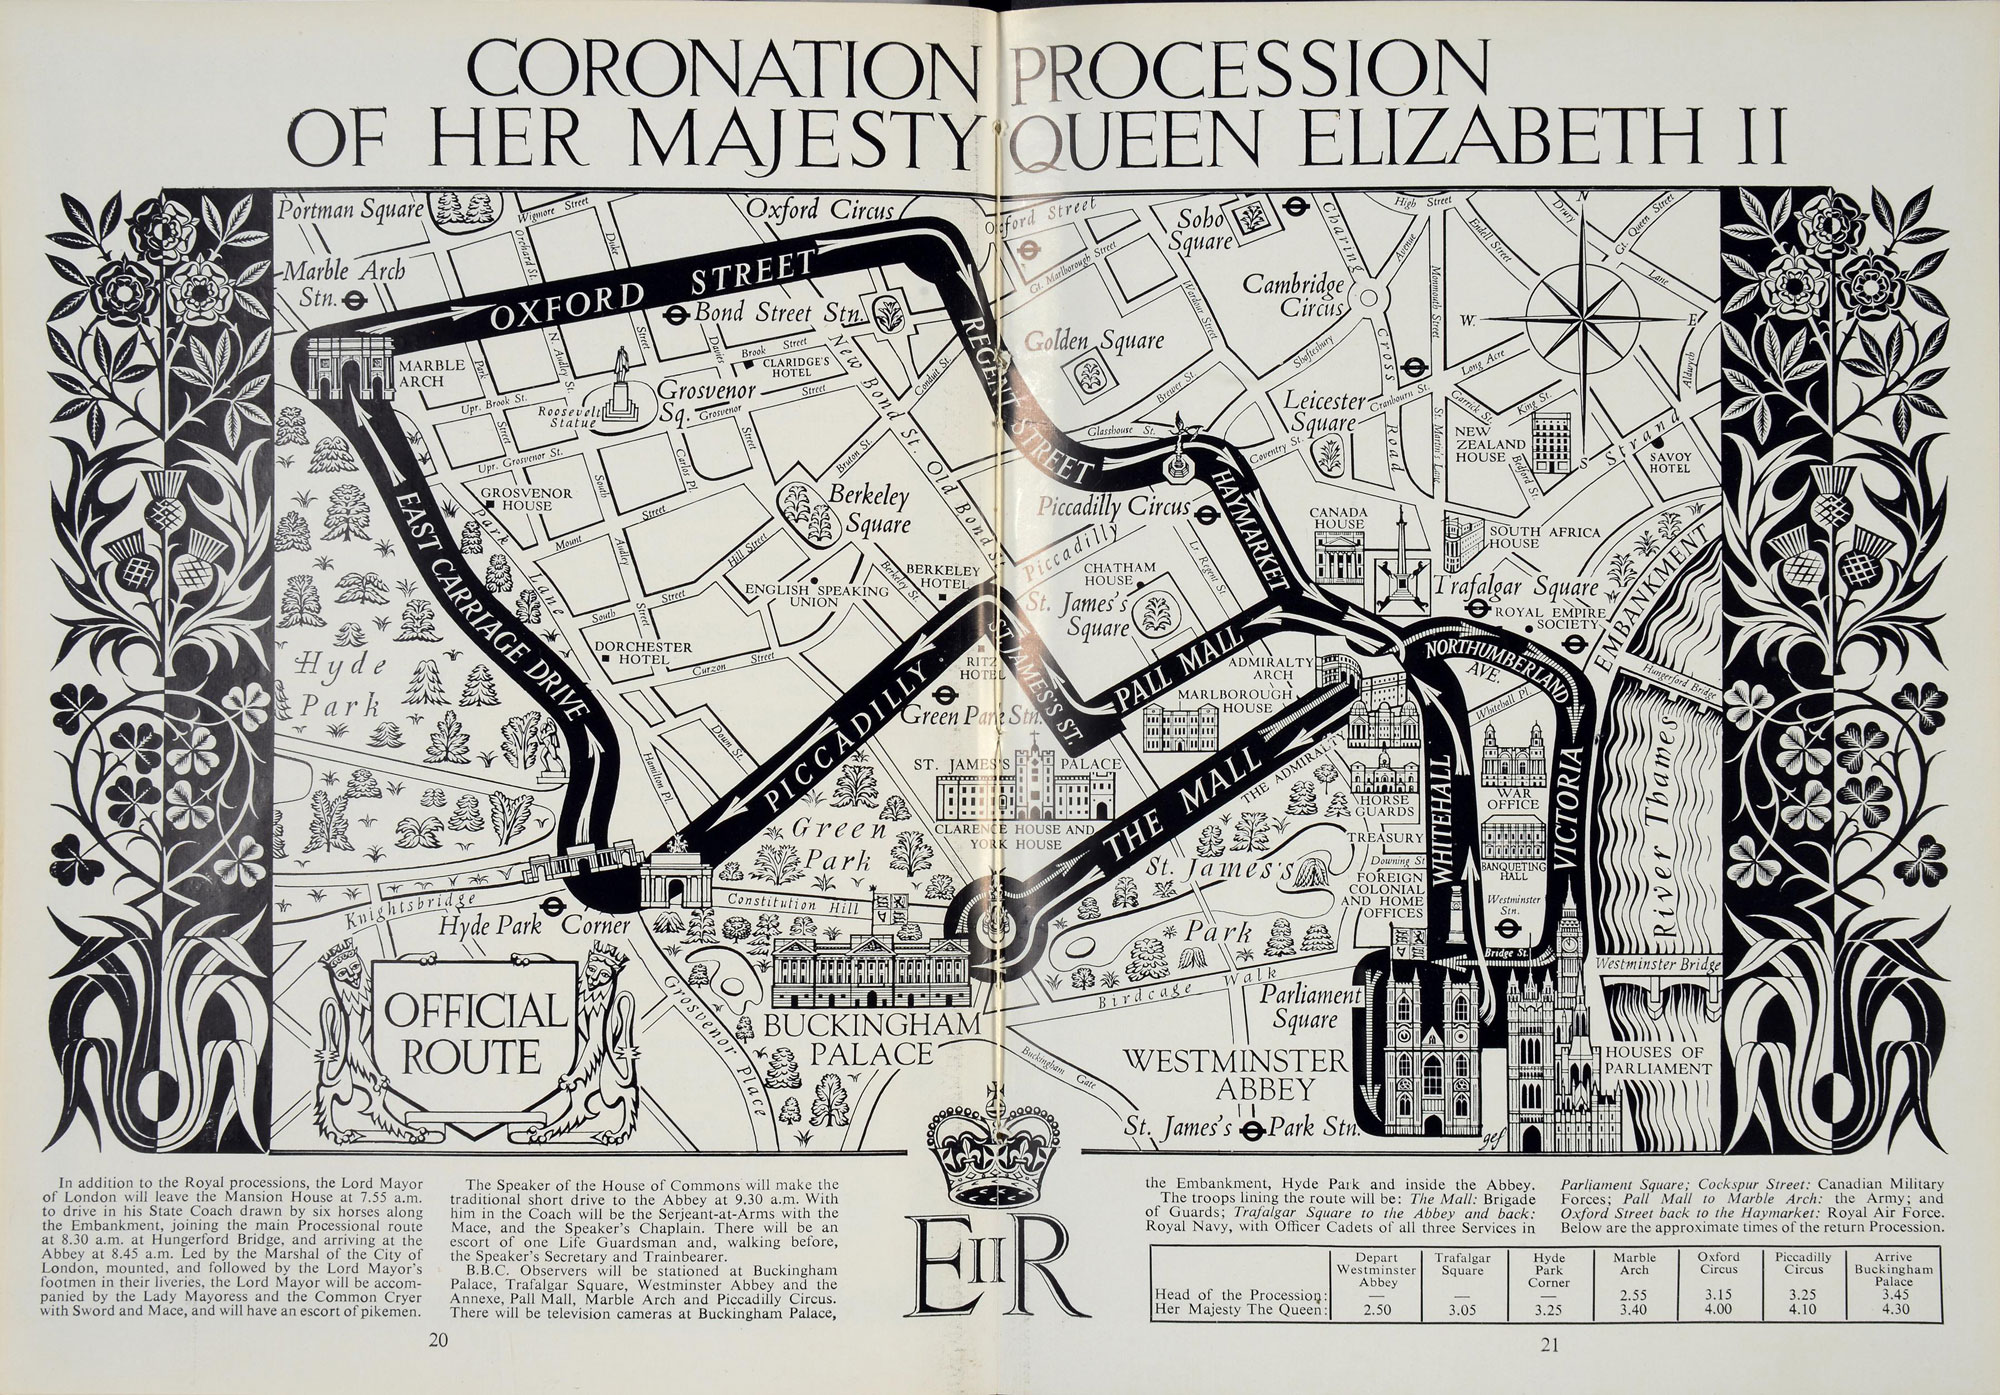 Map of the coronation route